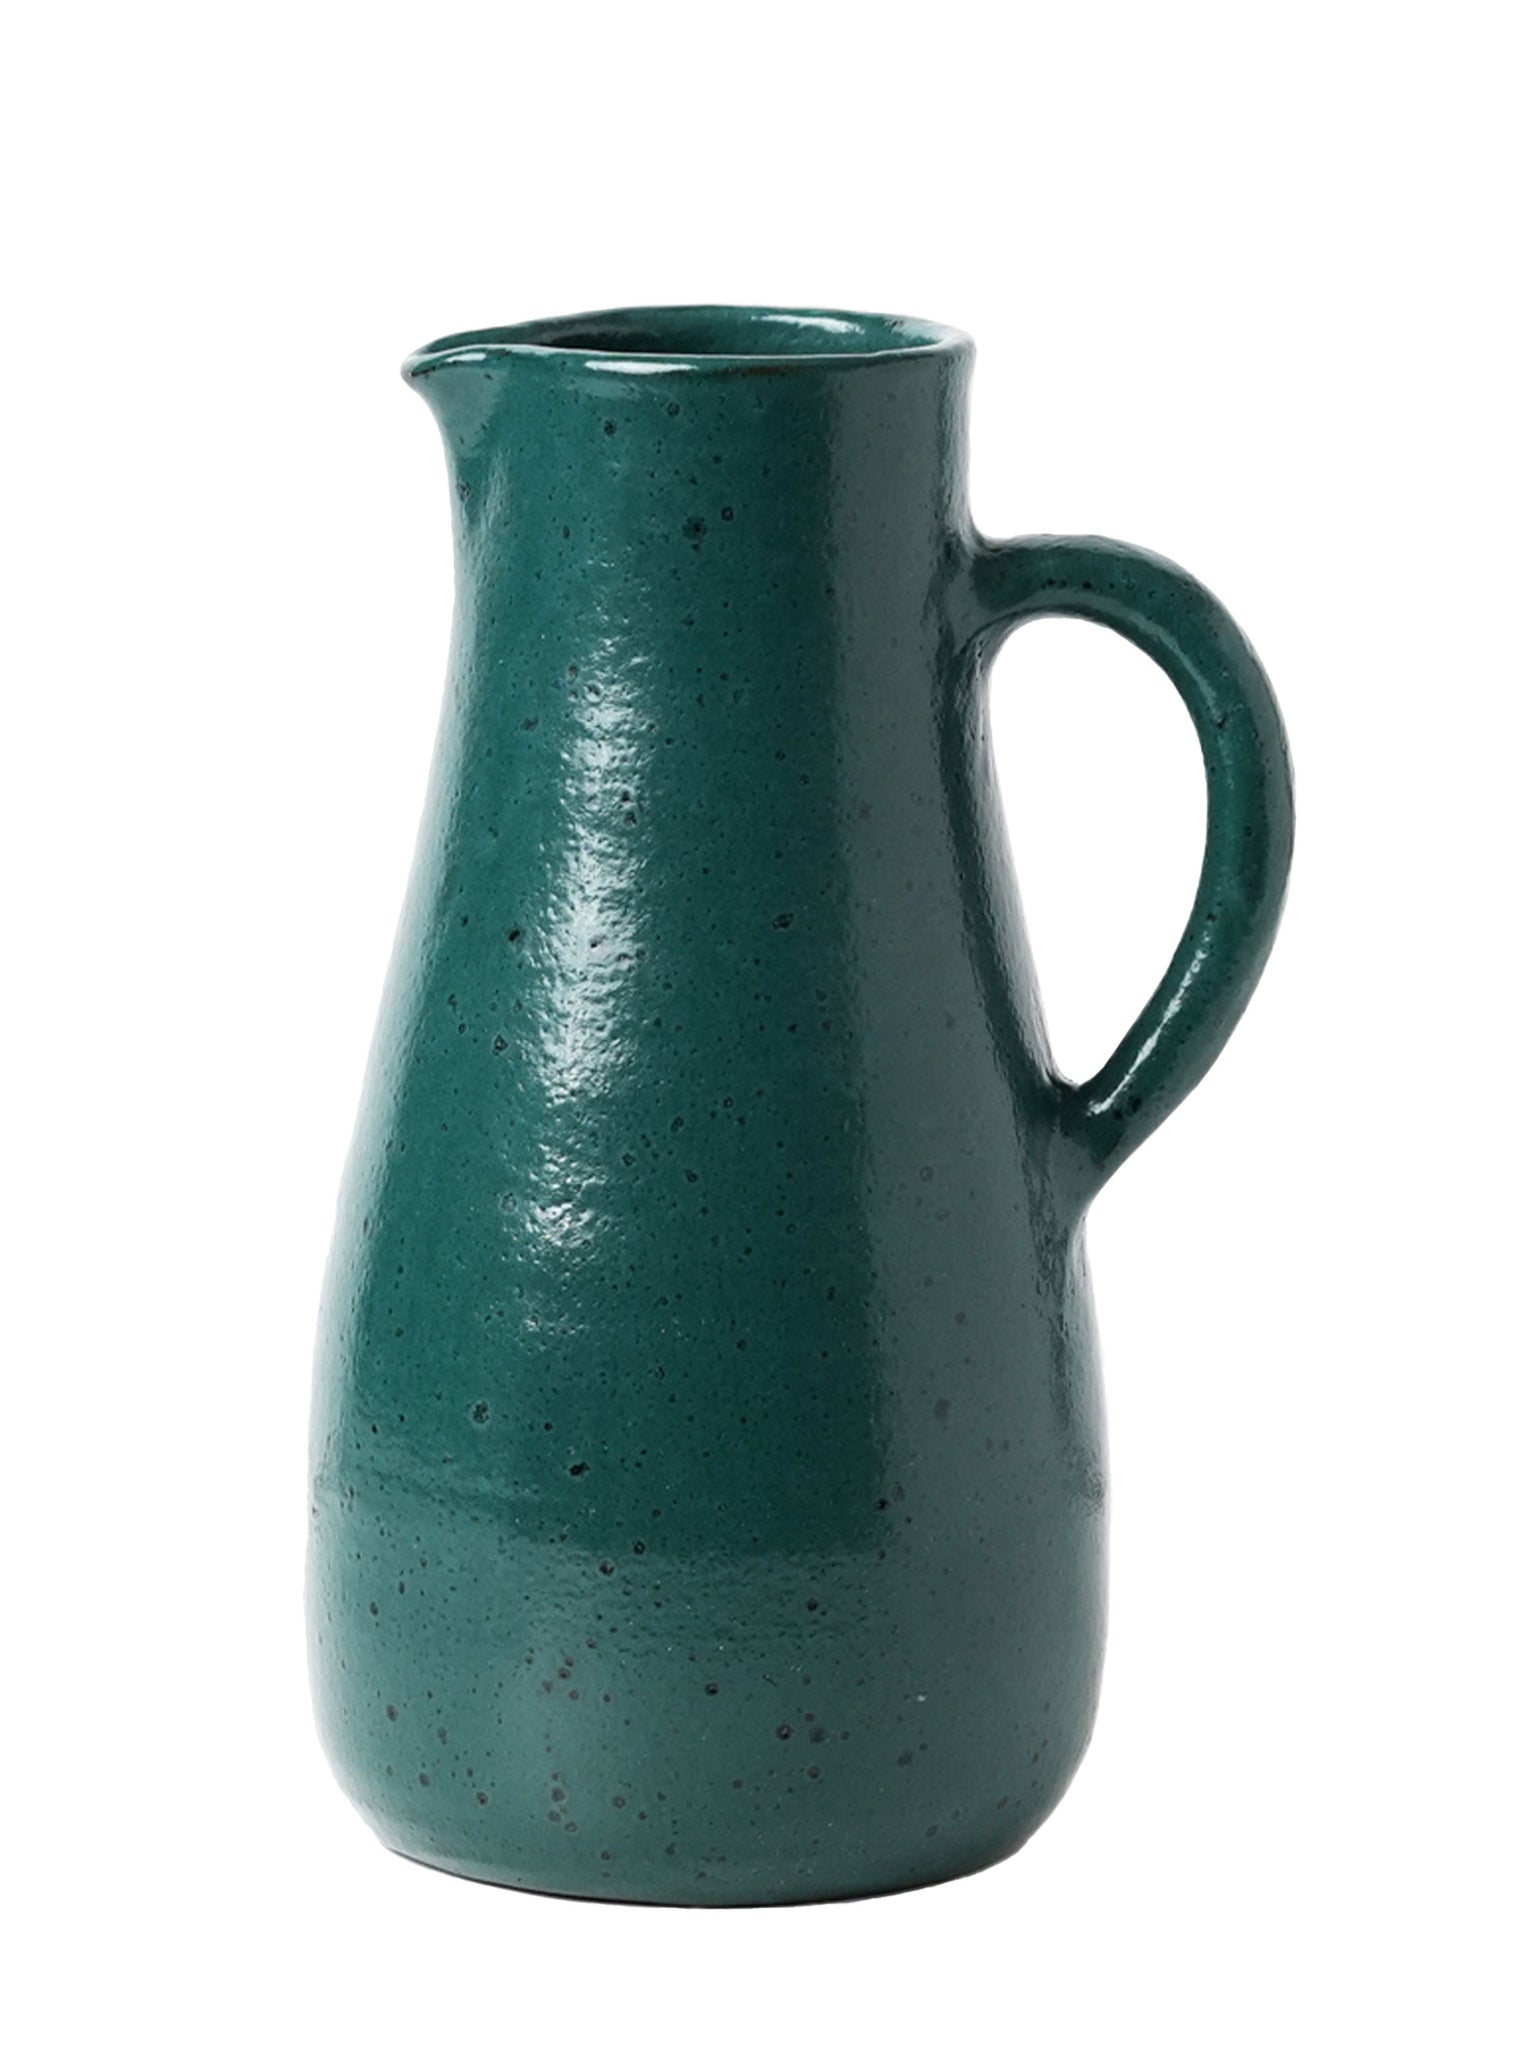 Emerald Green hand thrown ceramic pitcher by Gaëlle Le Doledec